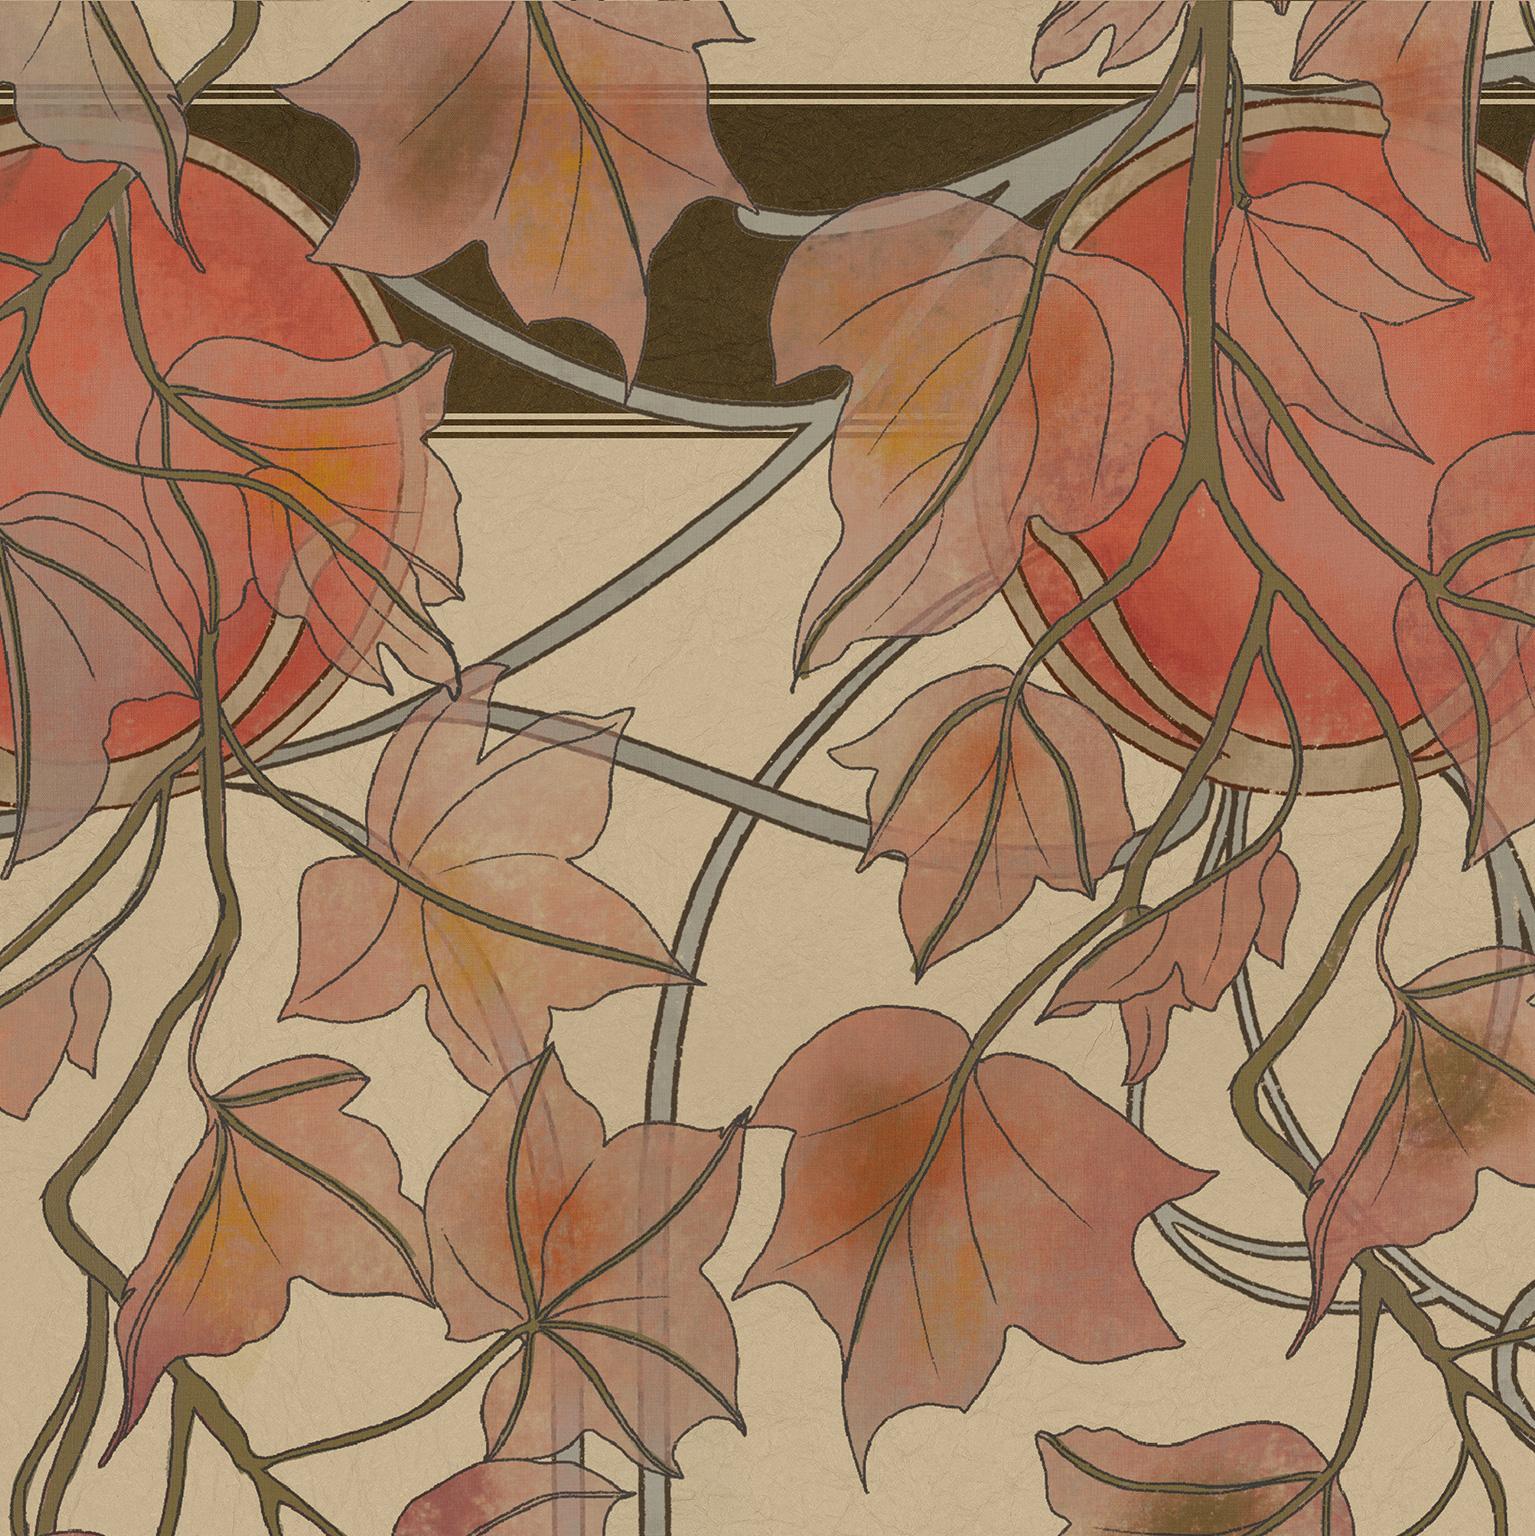 ORN19_007 Autumn
This asymmetric pattern - created with the help of wavy, clear and harmonious lines - is the artistic representation of Nature preparing for its cyclical hibernation.

The delicacy and refinement of this composition enhanced and